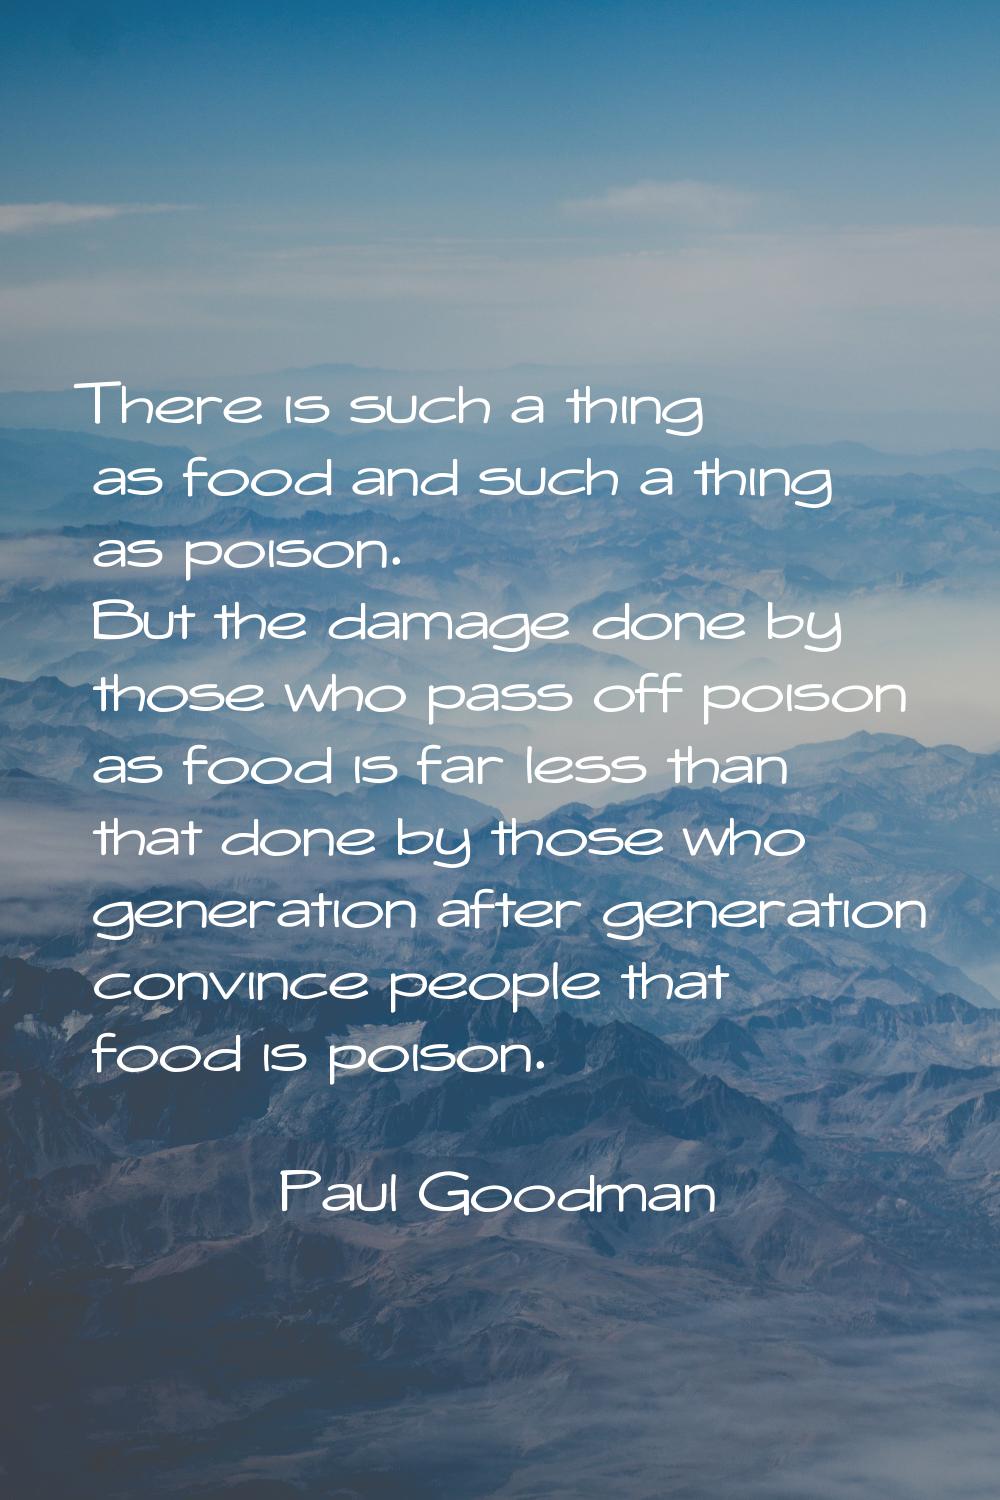 There is such a thing as food and such a thing as poison. But the damage done by those who pass off